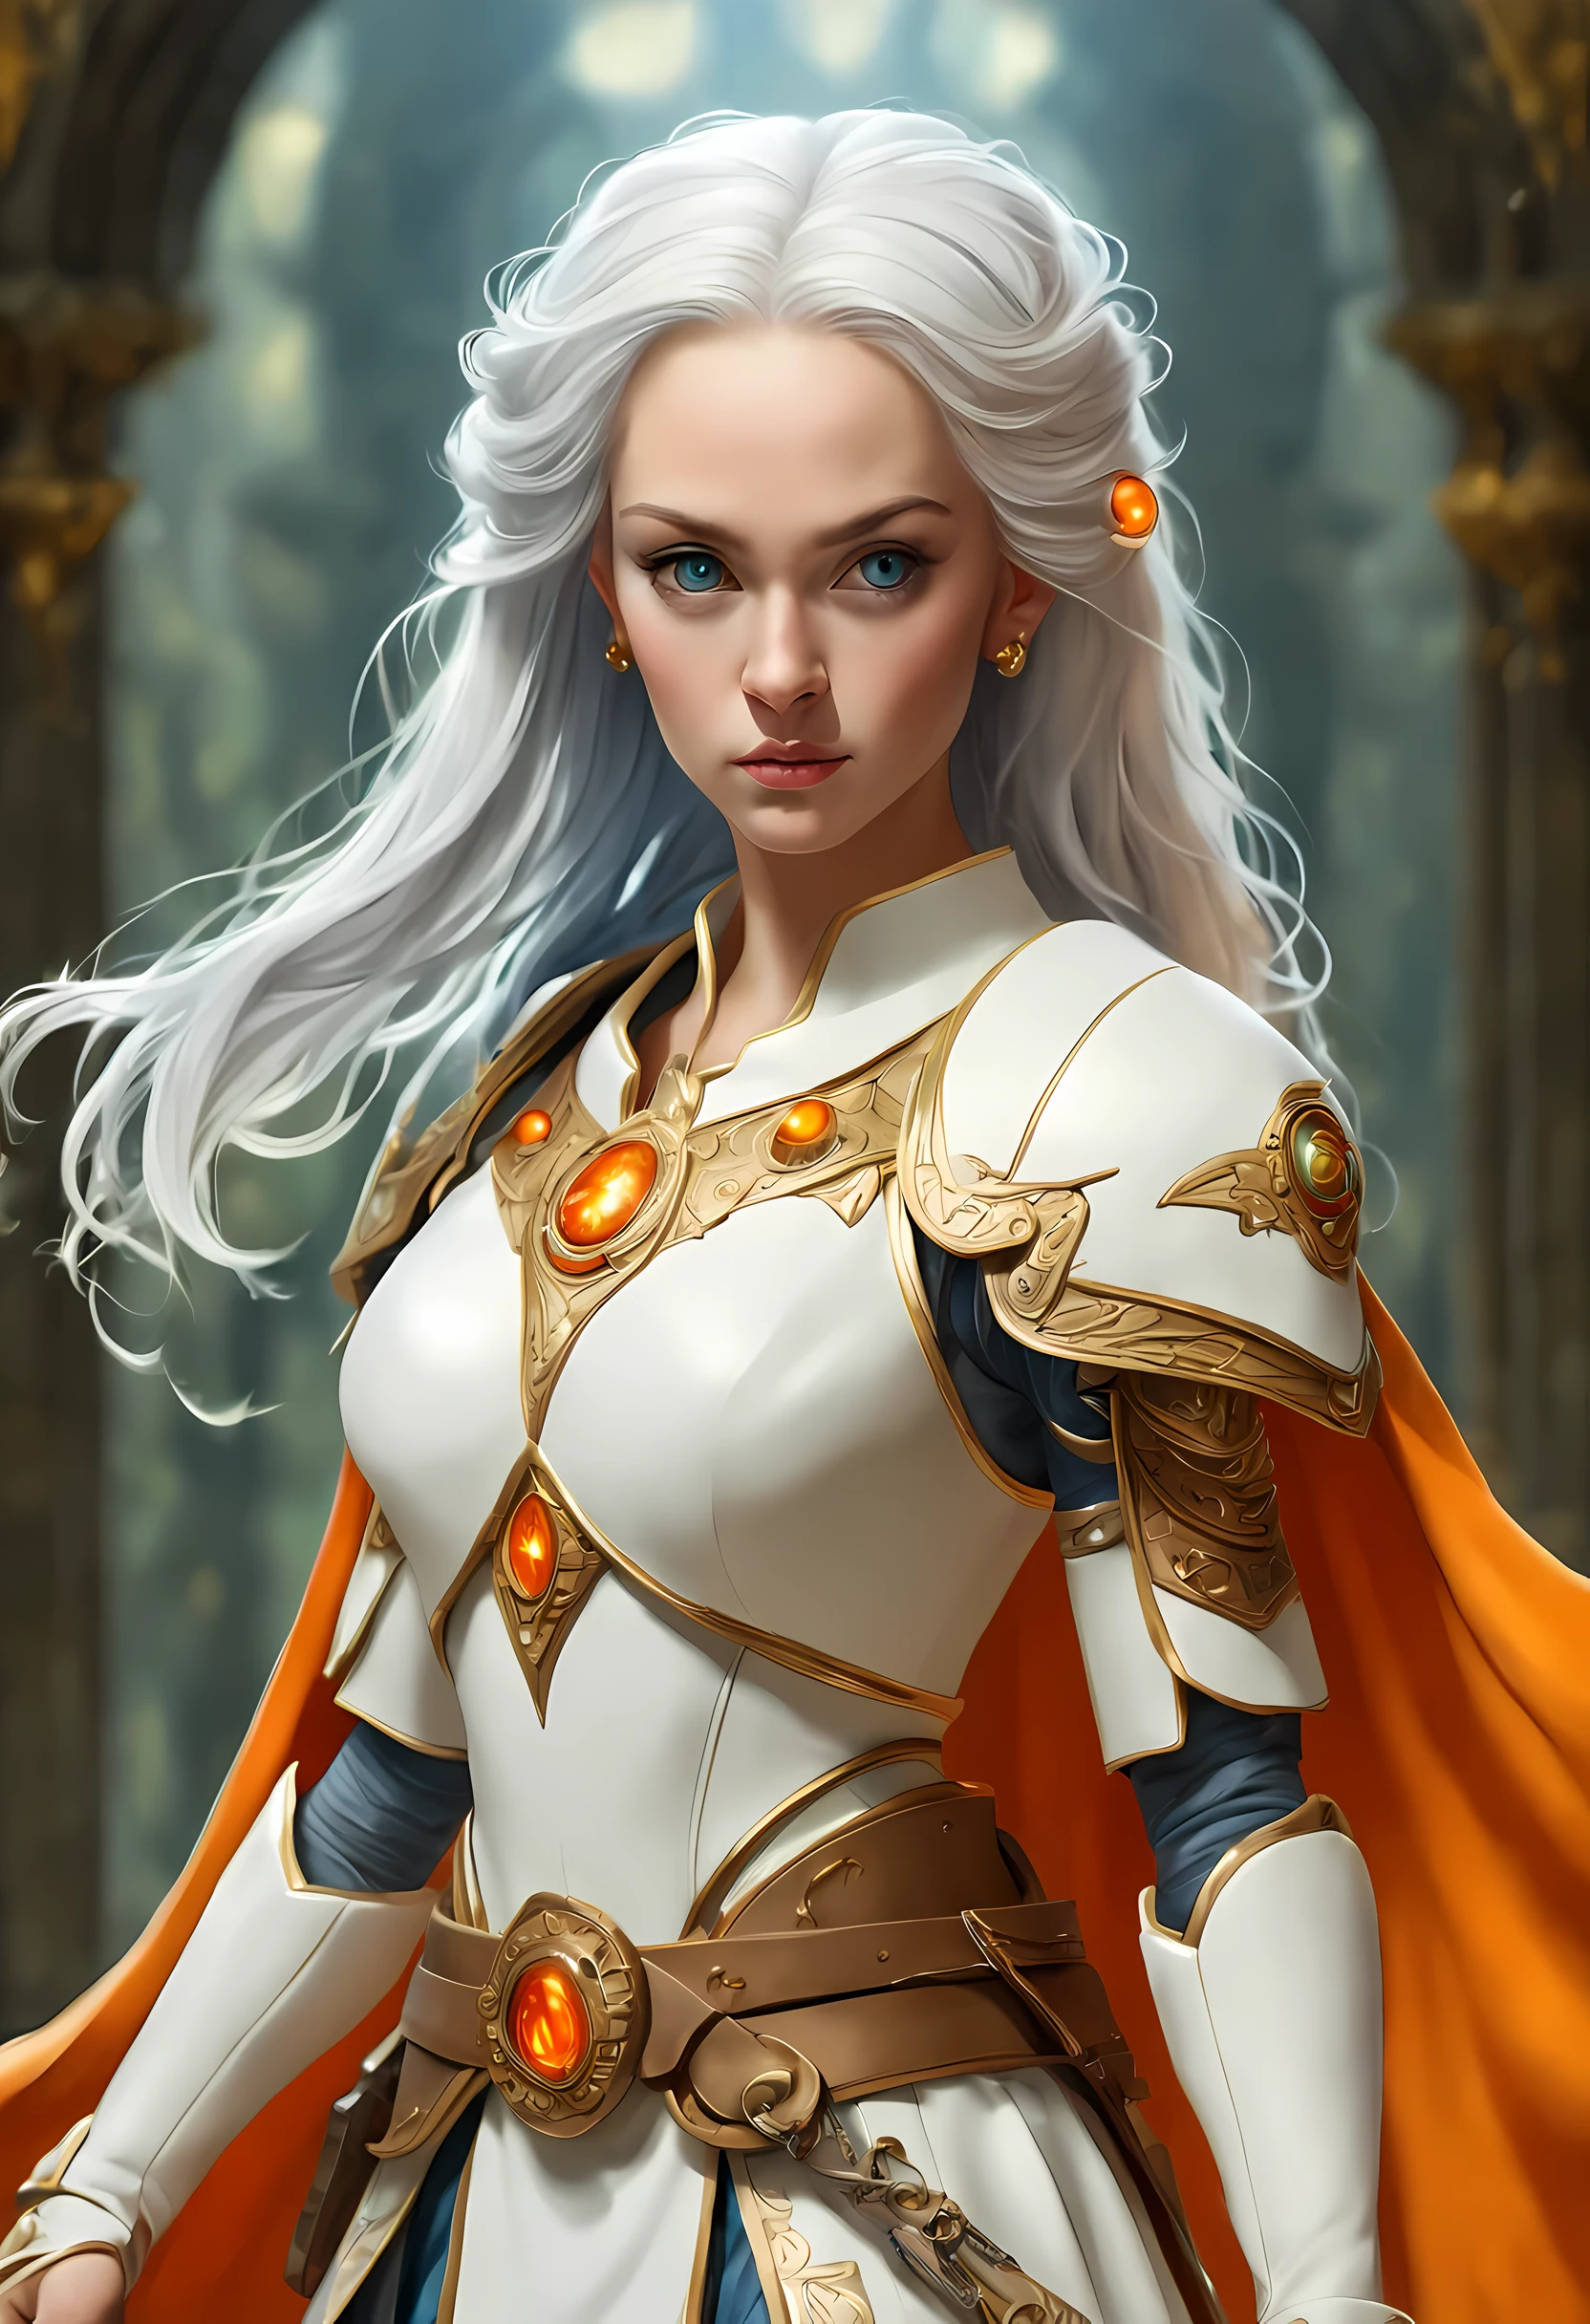 fAntAsy Art, dnd Art, RPG Art, 廣角鏡頭, (mAsterpiece: 1.4) A (portrAit: 1.3) 激烈的 detAils, highly detAiled, photoreAlistic, best quAlity, 高解析度, portrAit A femAle (fAntAsy Art, MAsterpiece, best quAlity: 1.3) 藍圖 (藍色的 skin: 1.5, 激烈的 detAils fAciAl detAils, exquisite beAuty, (fAntAsy Art, MAsterpiece, best quAlity) 牧師, (藍色的: 1.3) skinned femAle, (白色的 hAir: 1.3), long hAir, 激烈的 (綠色的: 1.3) 眼睛, fAntAsy Art, MAsterpiece, best quAlity) Armed A fiery sword red fire, weAring heAvy (白色的: 1.3) hAlf plAte mAil Armor, weAring high heeled lAced boots, weAring An(orAnge :1.3) cloAk, weAring glowing holy symbol GlowingRunes_黃色的, within fAntAsy temple bAckground, 反射光, high detAils, best quAlity, 16k, [ultrA detAiled], mAsterpiece, best quAlity, (extremely detAiled), 特寫, ultrA 廣角鏡頭, photoreAlistic, 生的, fAntAsy Art, dnd Art, fAntAsy Art, reAlistic Art,((best quAlity)), ((mAsterpiece)), (detAiled), perfect fAce, ((no eArs: 1.6))